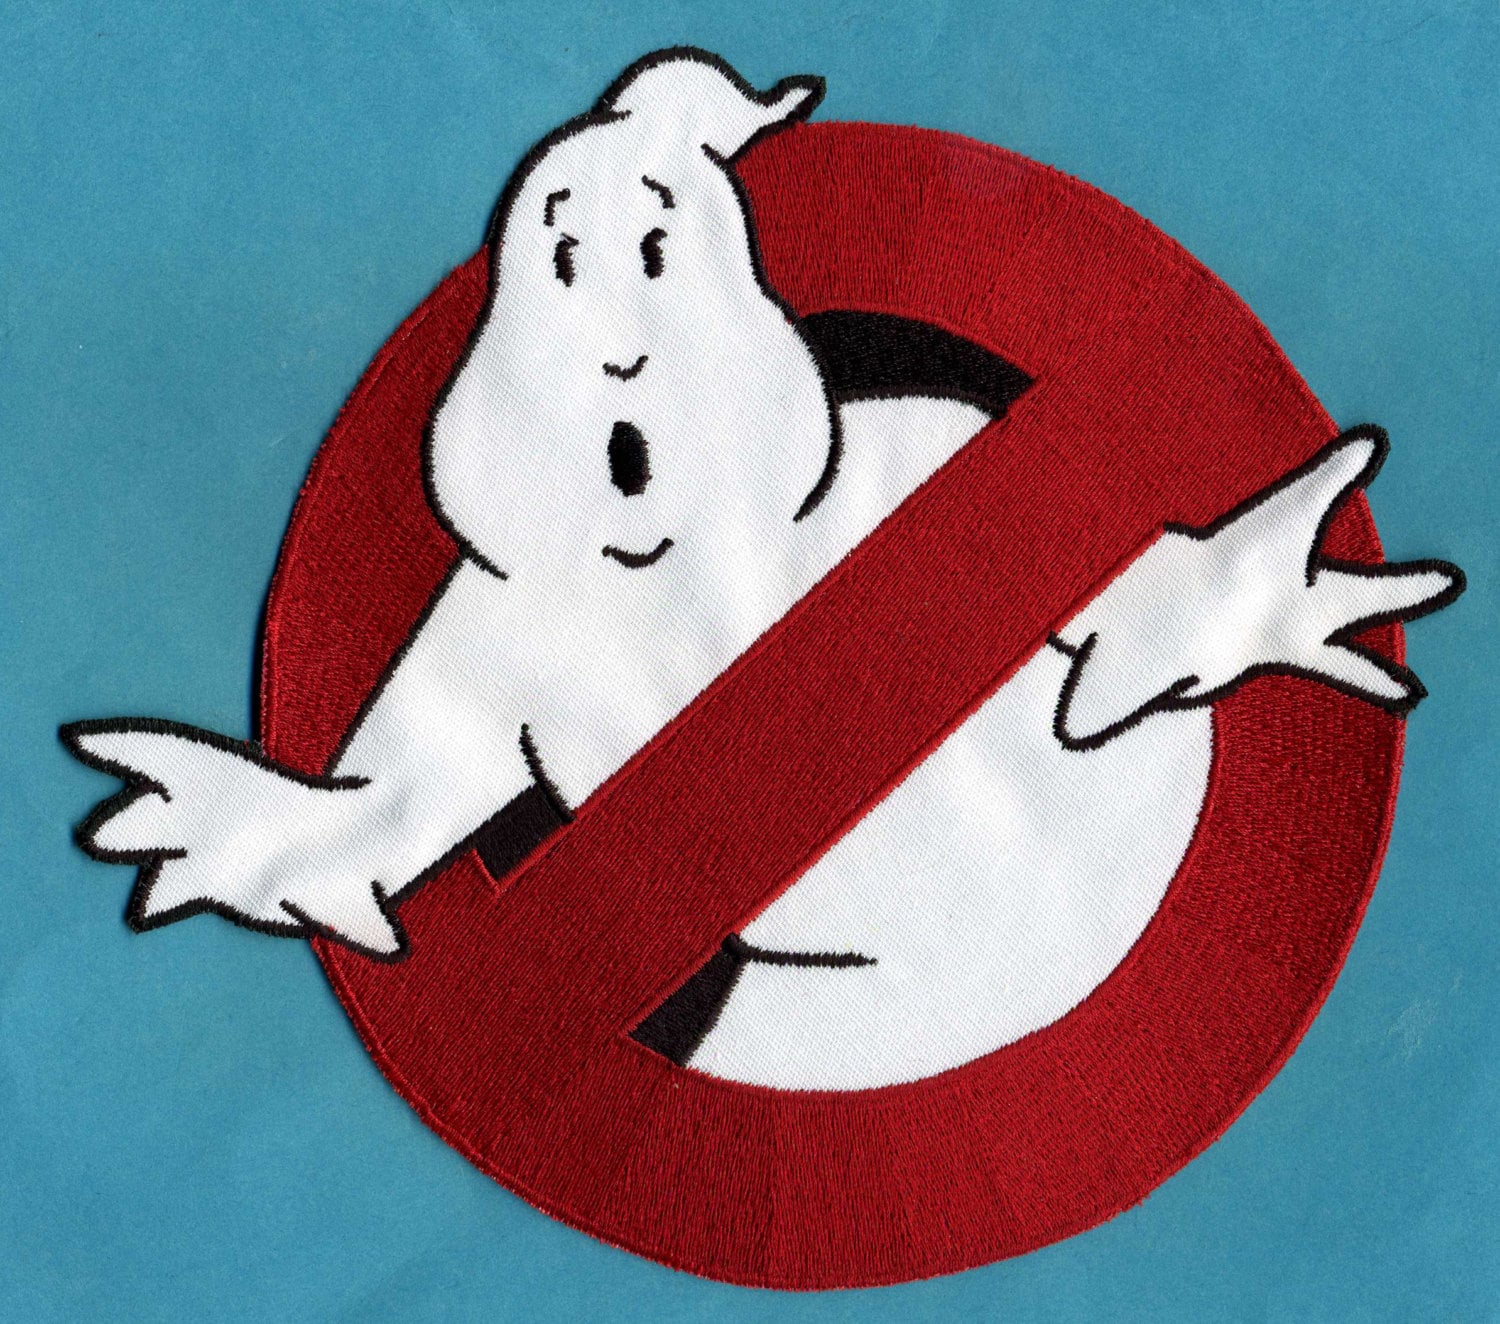 Ghostbusters 1 style No Ghost Embroidered Patch w/hook backing